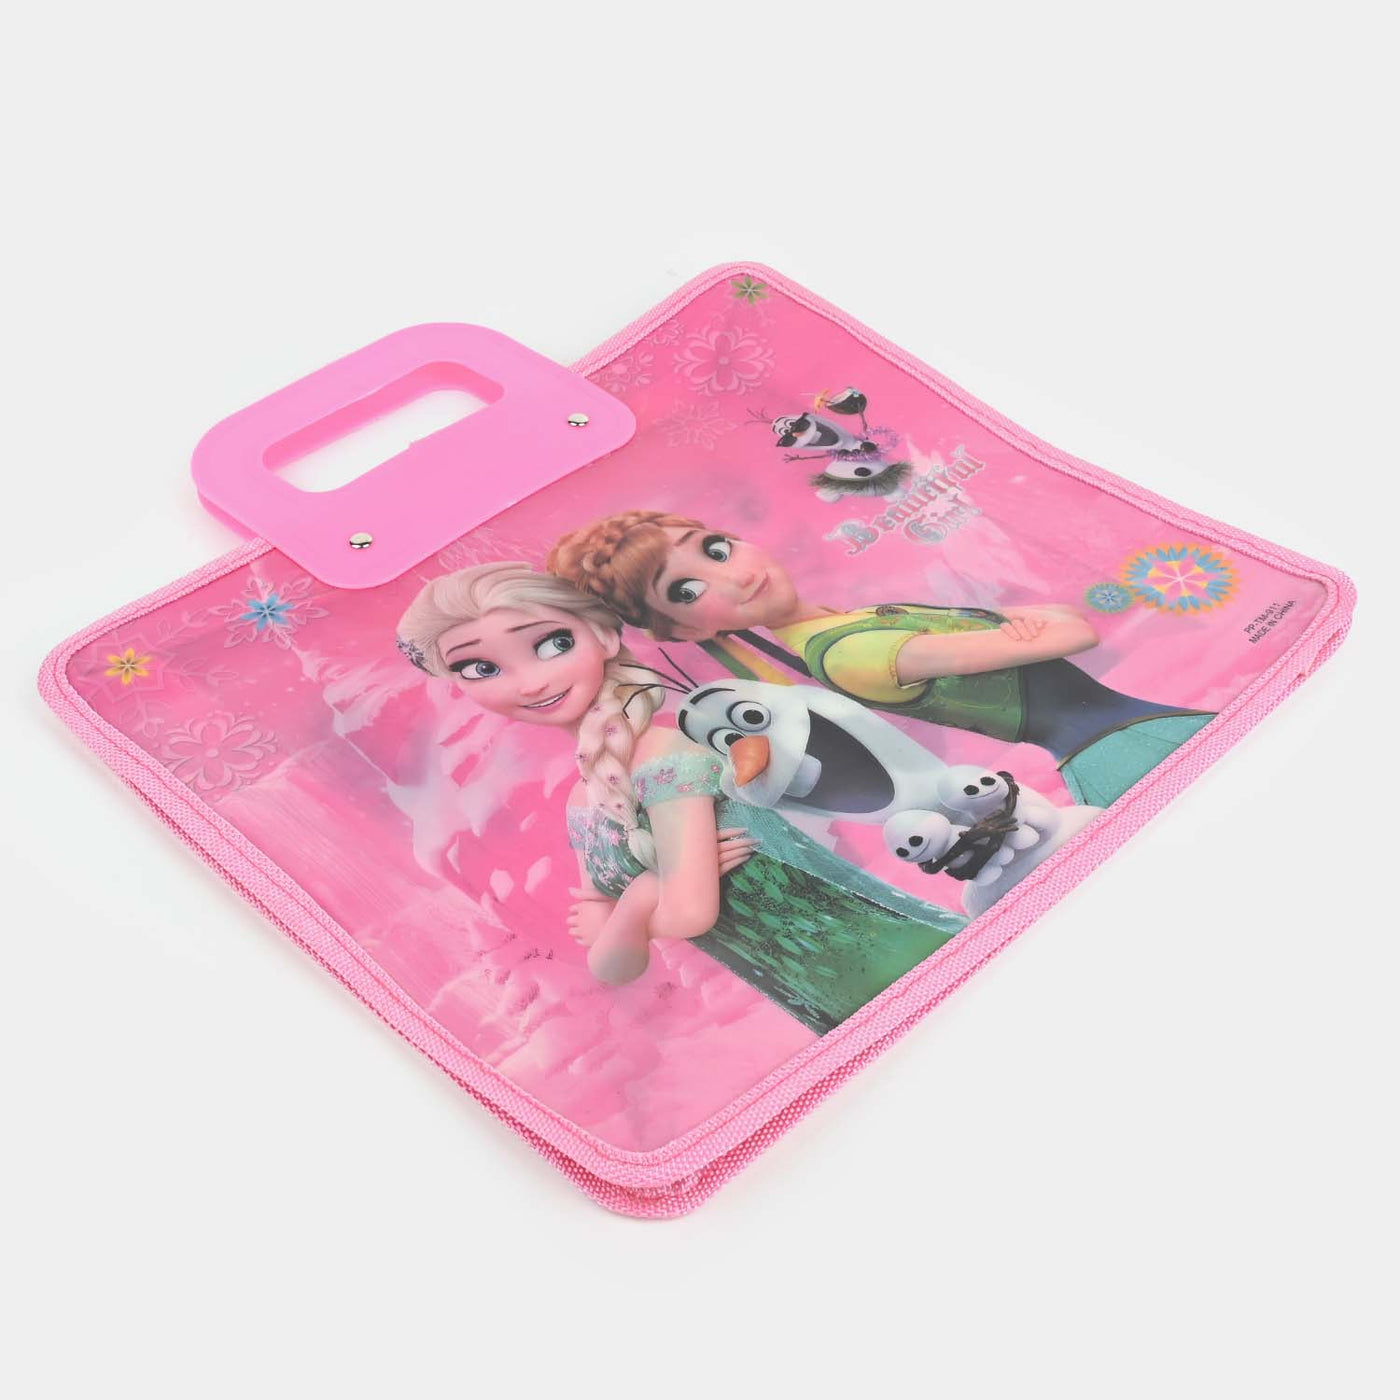 Cute Character Bag For Kids